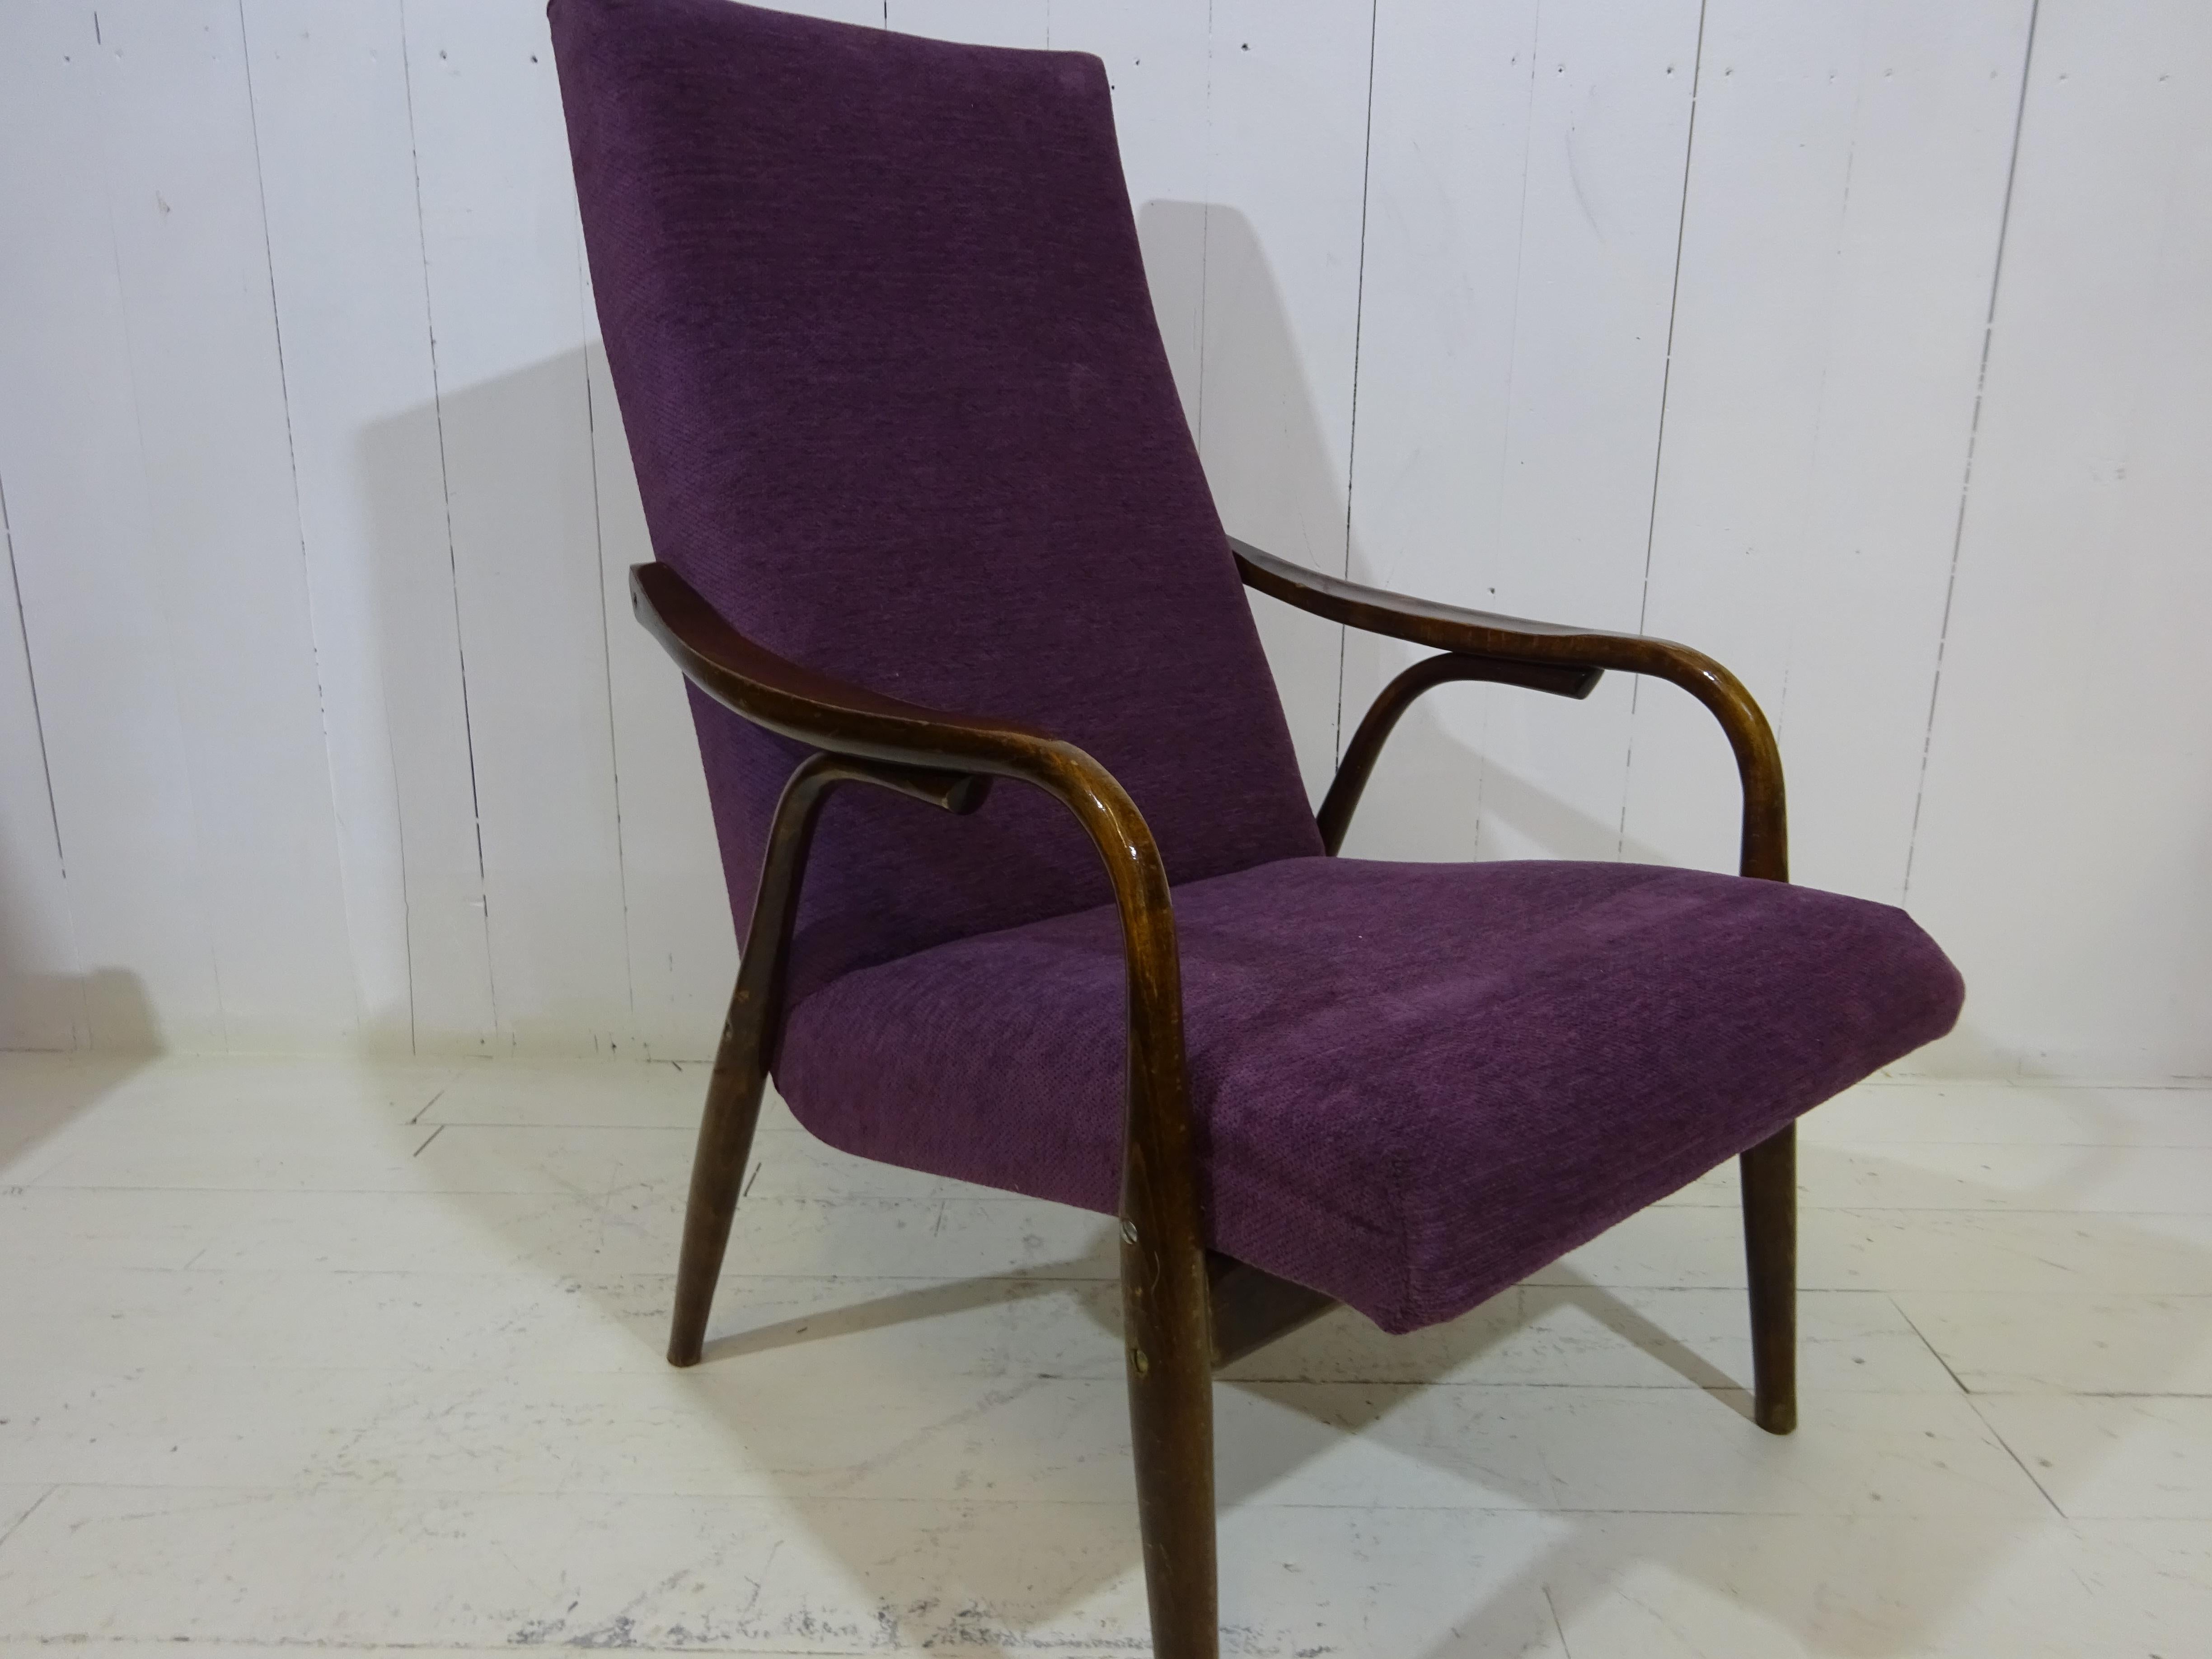 Hand-Crafted Limited Edition 1960's Bentwood Lounge Chair in Purple Chenille by Ton